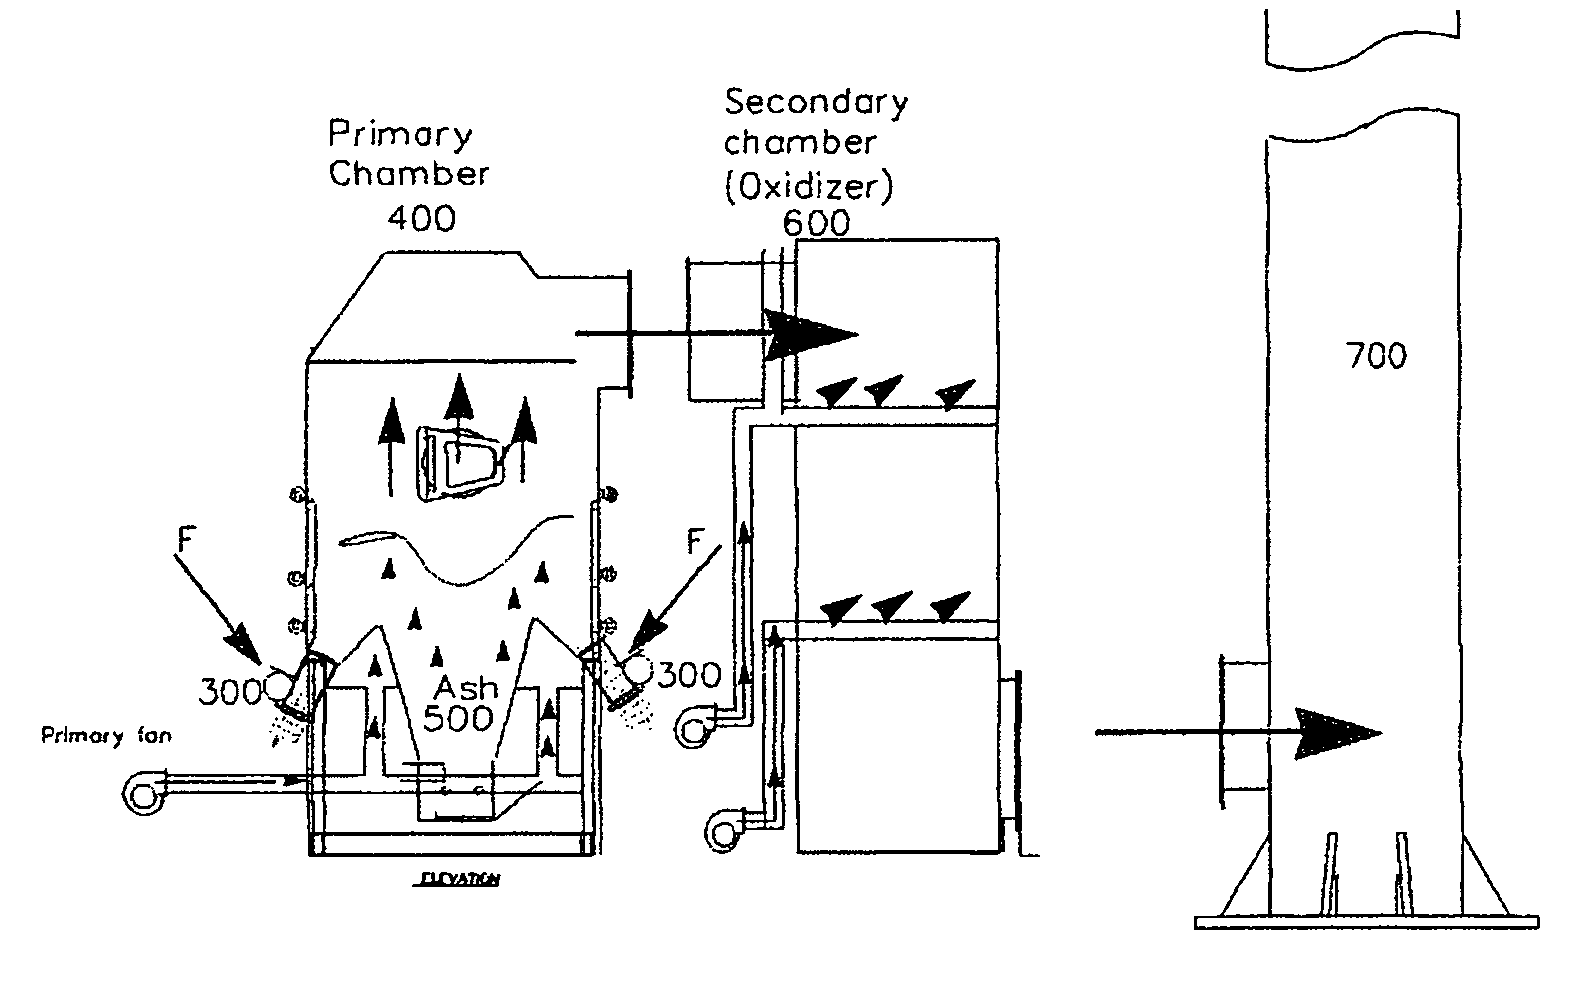 Side feed/centre ash dump system